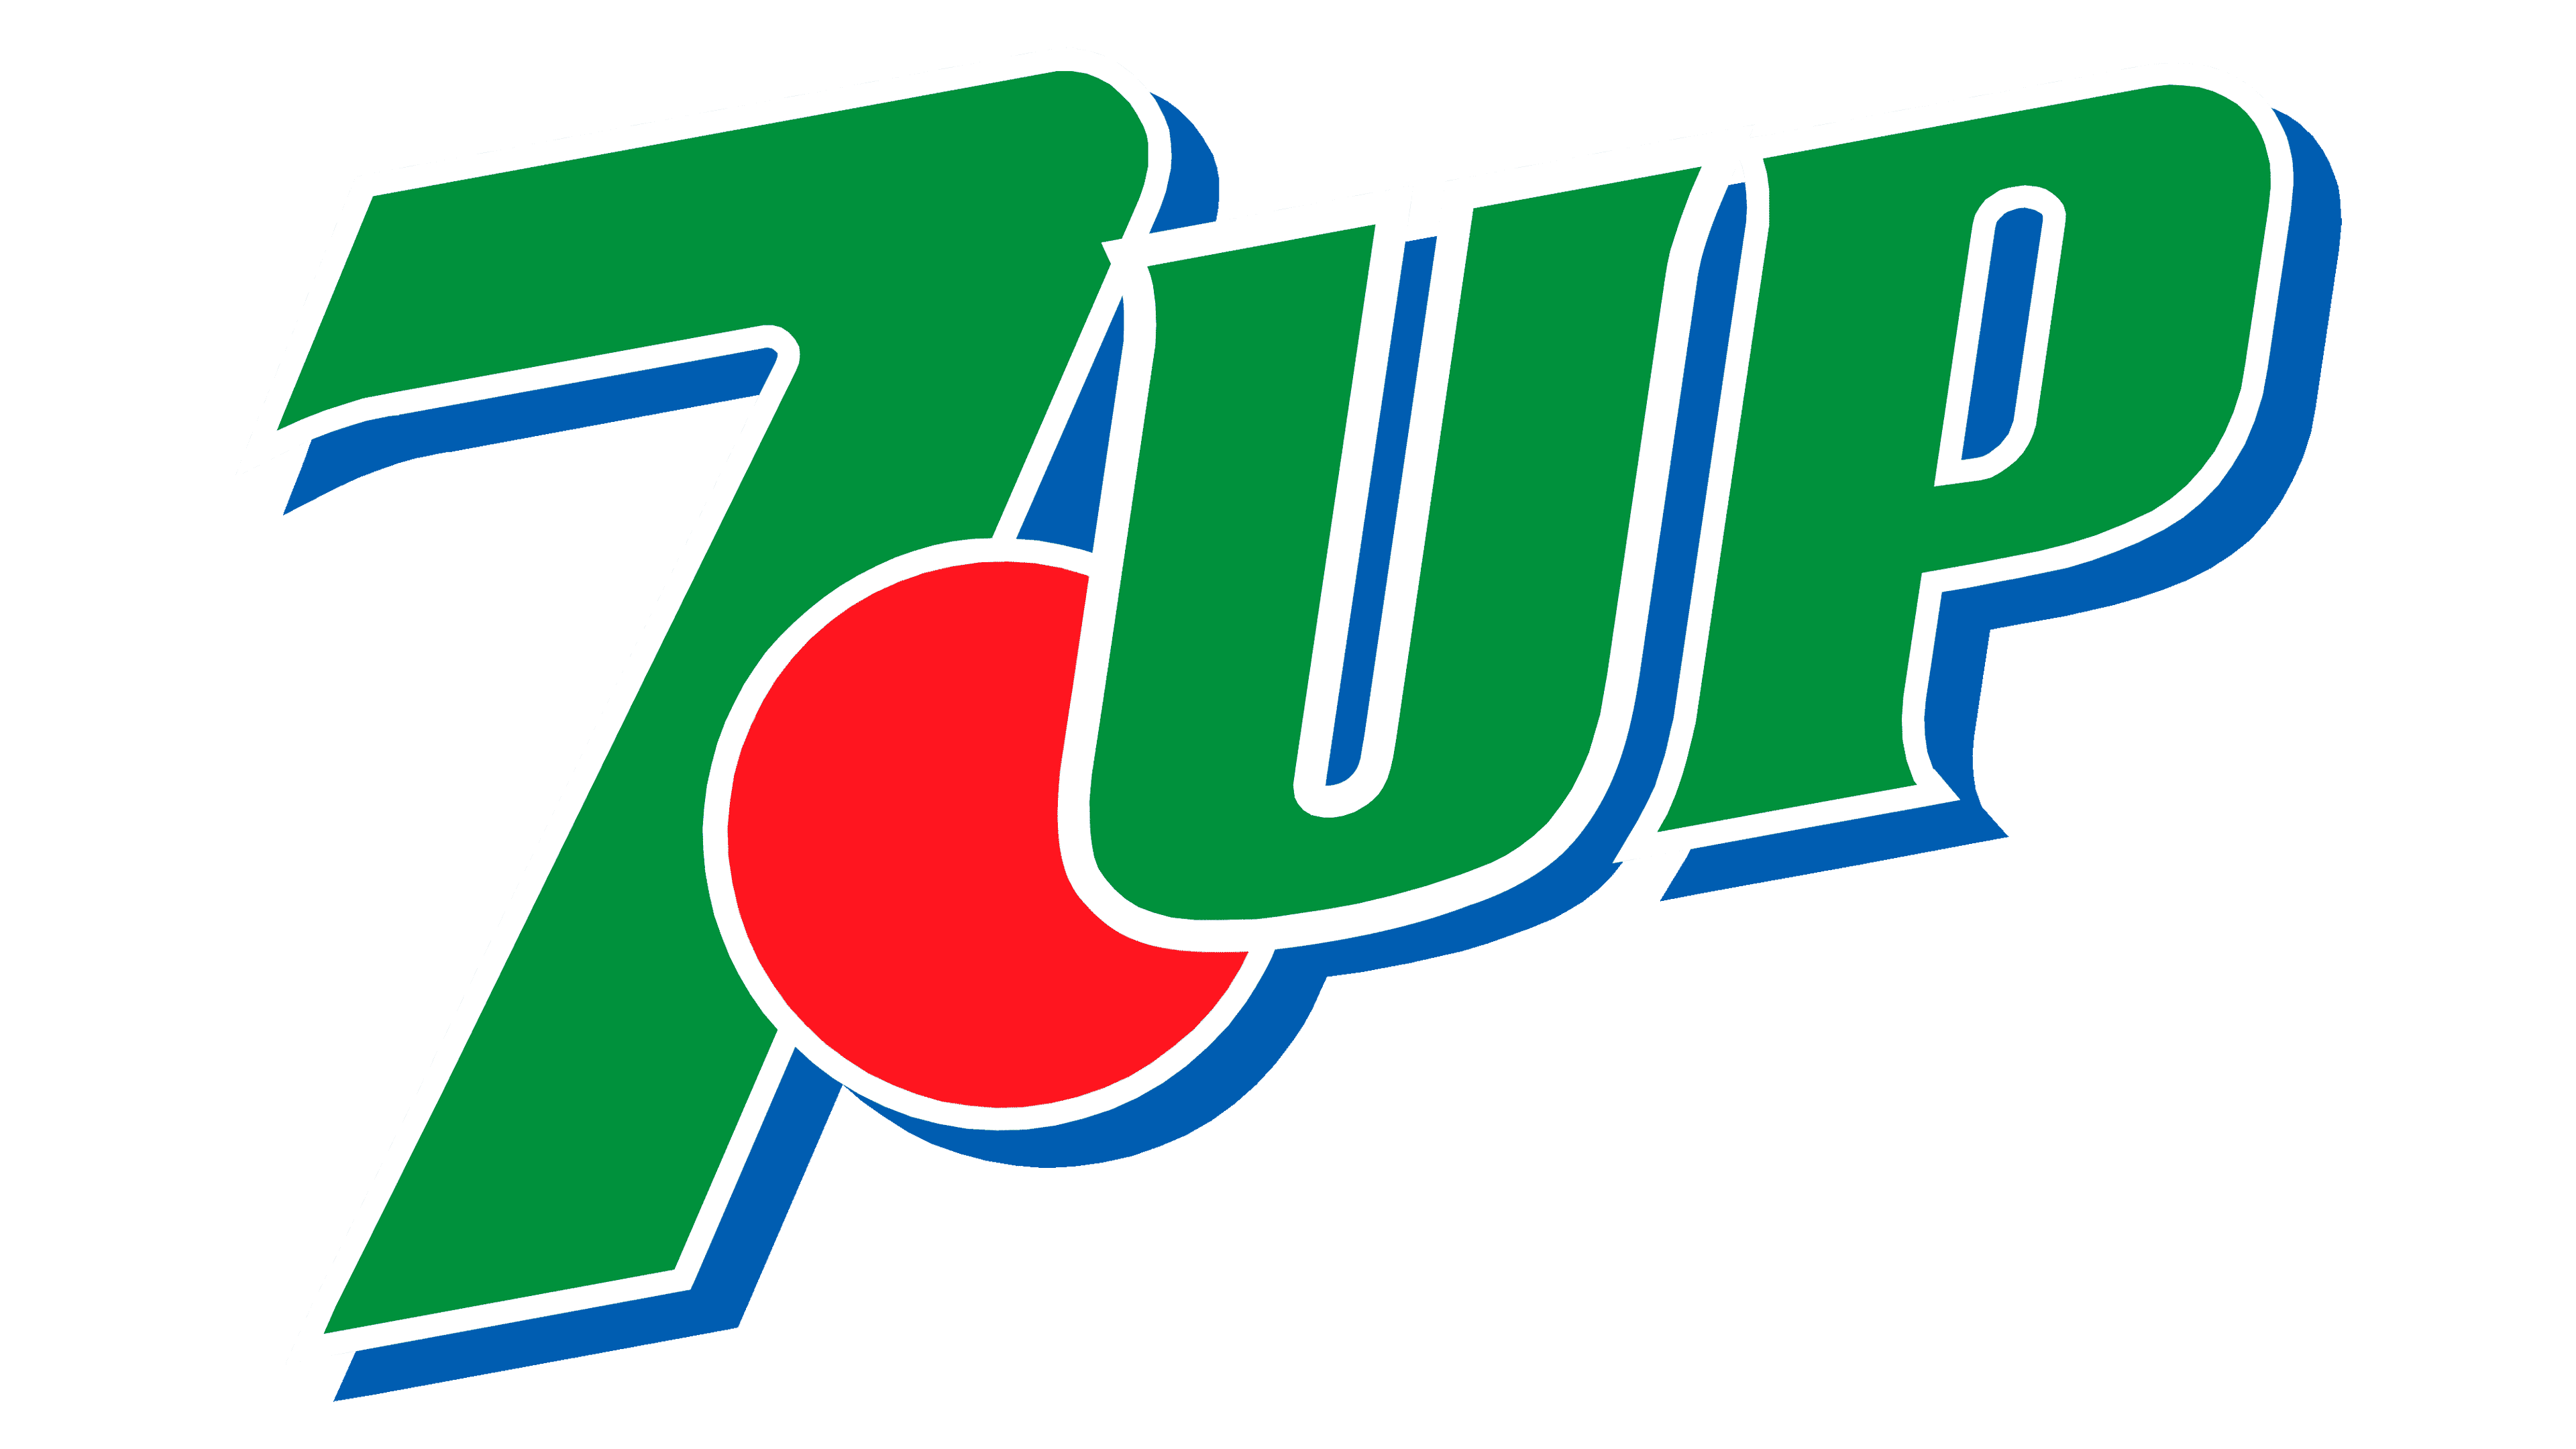 7Up Logo and symbol, meaning, history, PNG, brand